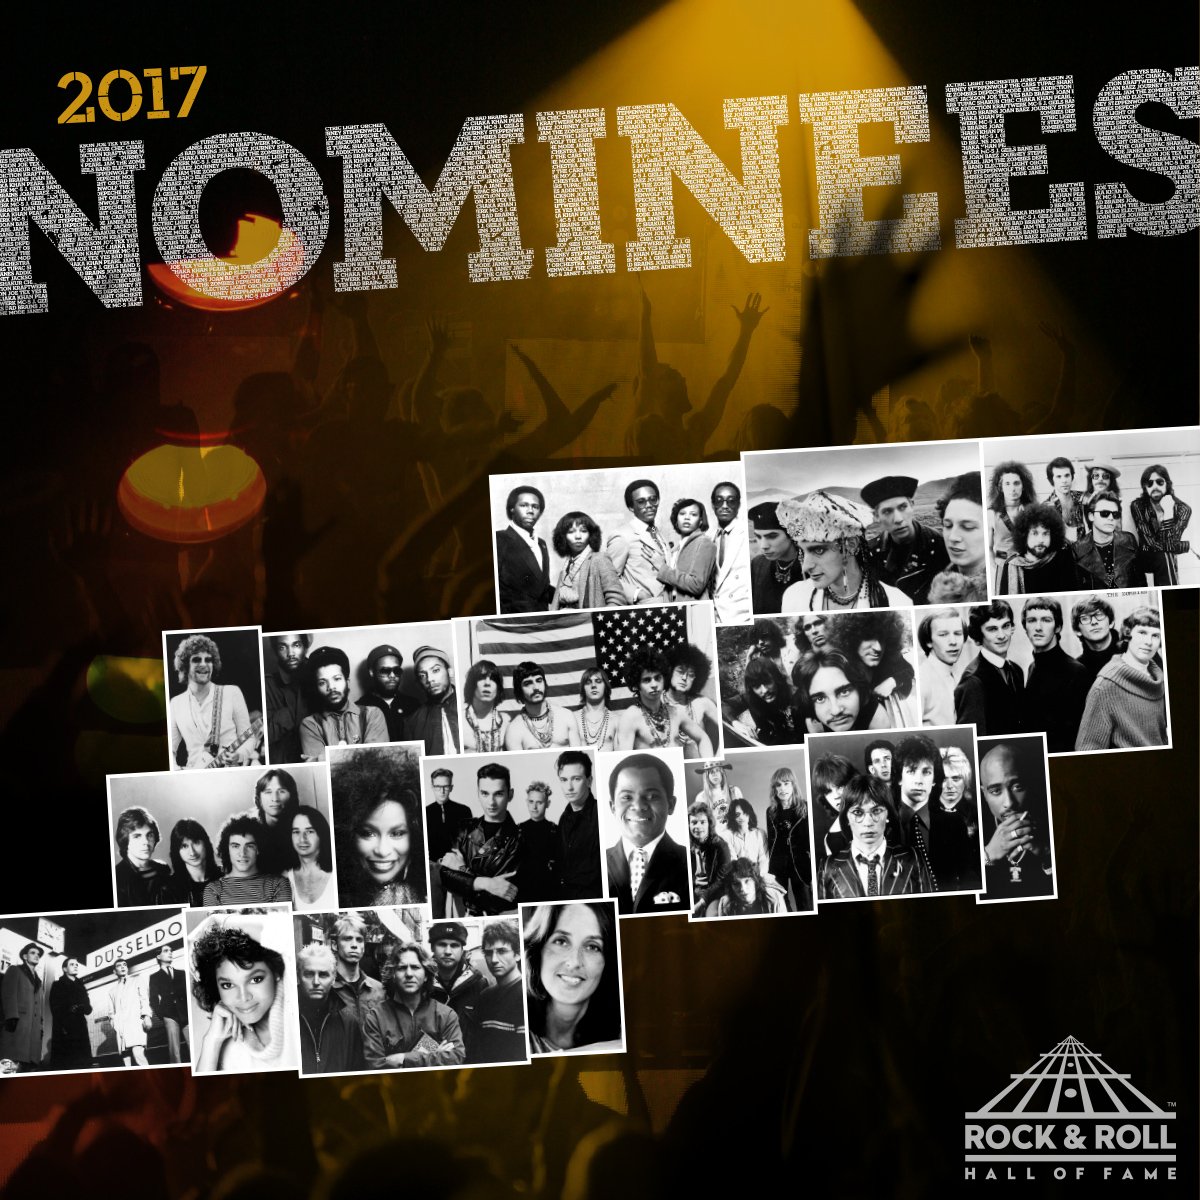 Rock Hall to Announce Class of 2017 on Dec. 20 - Best Classic Bands ...